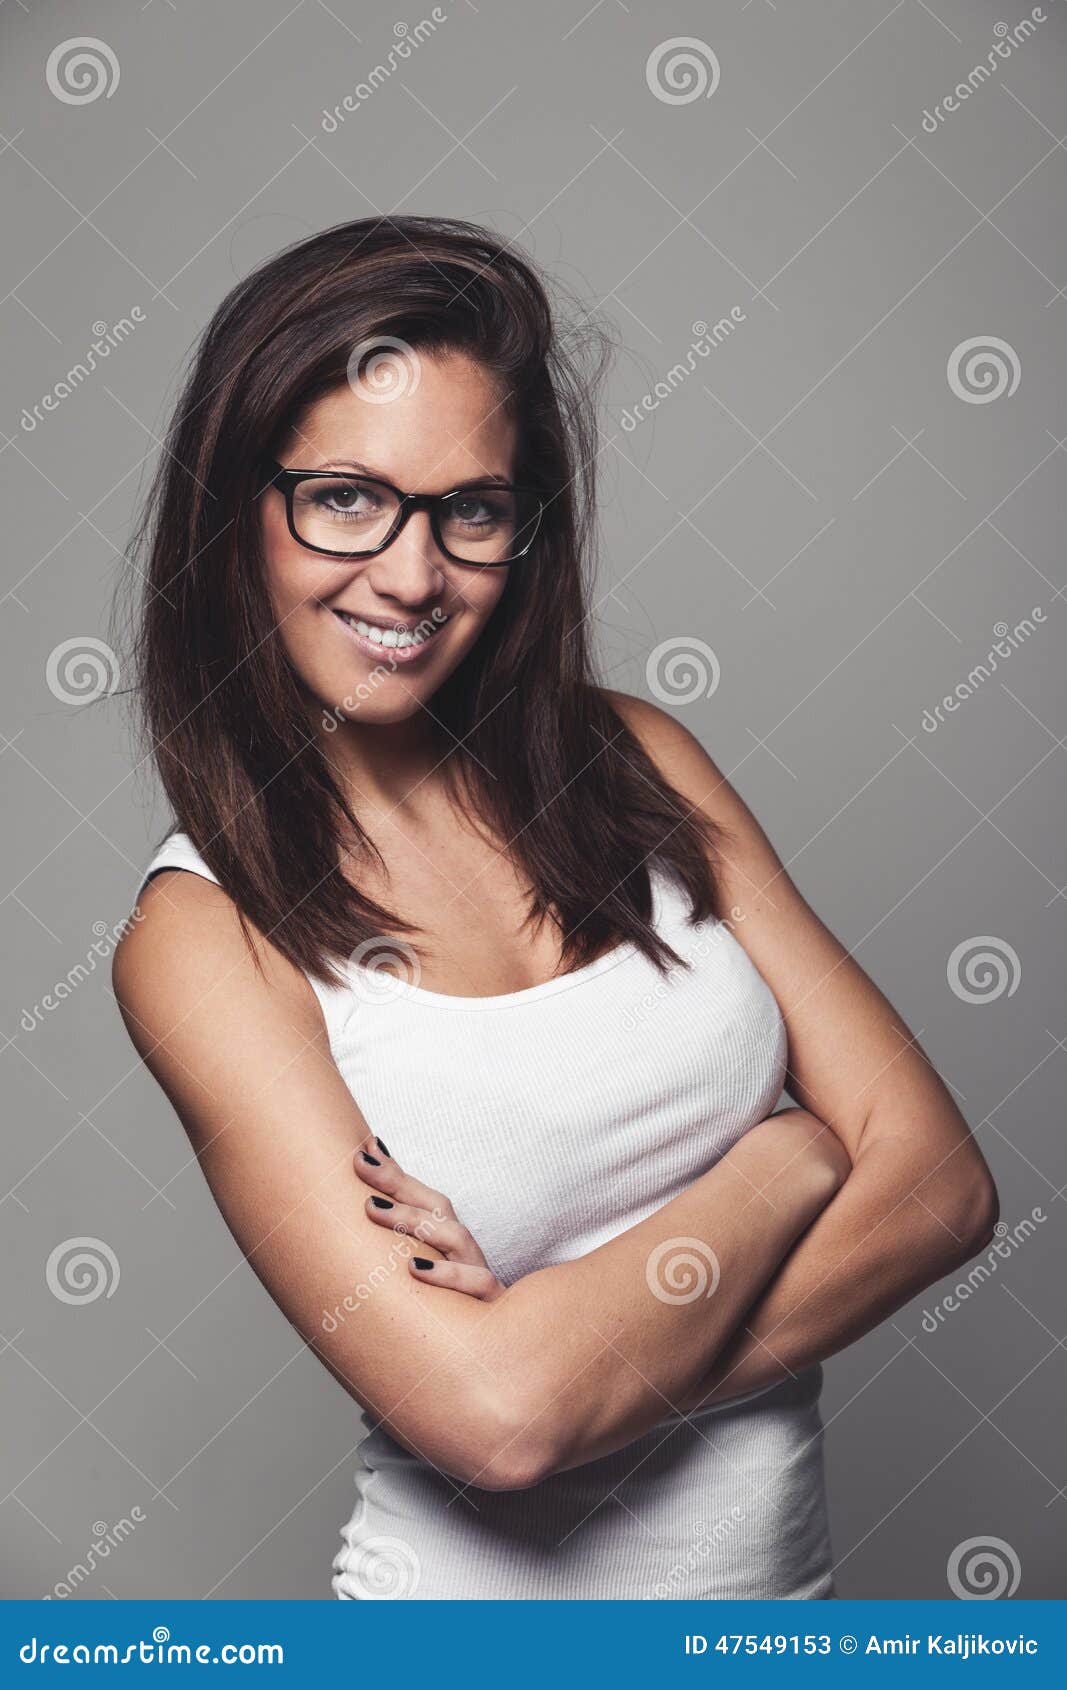 Cool Shapely Girl with Nerdy Glasses - Image of attractive, happy: 47549153